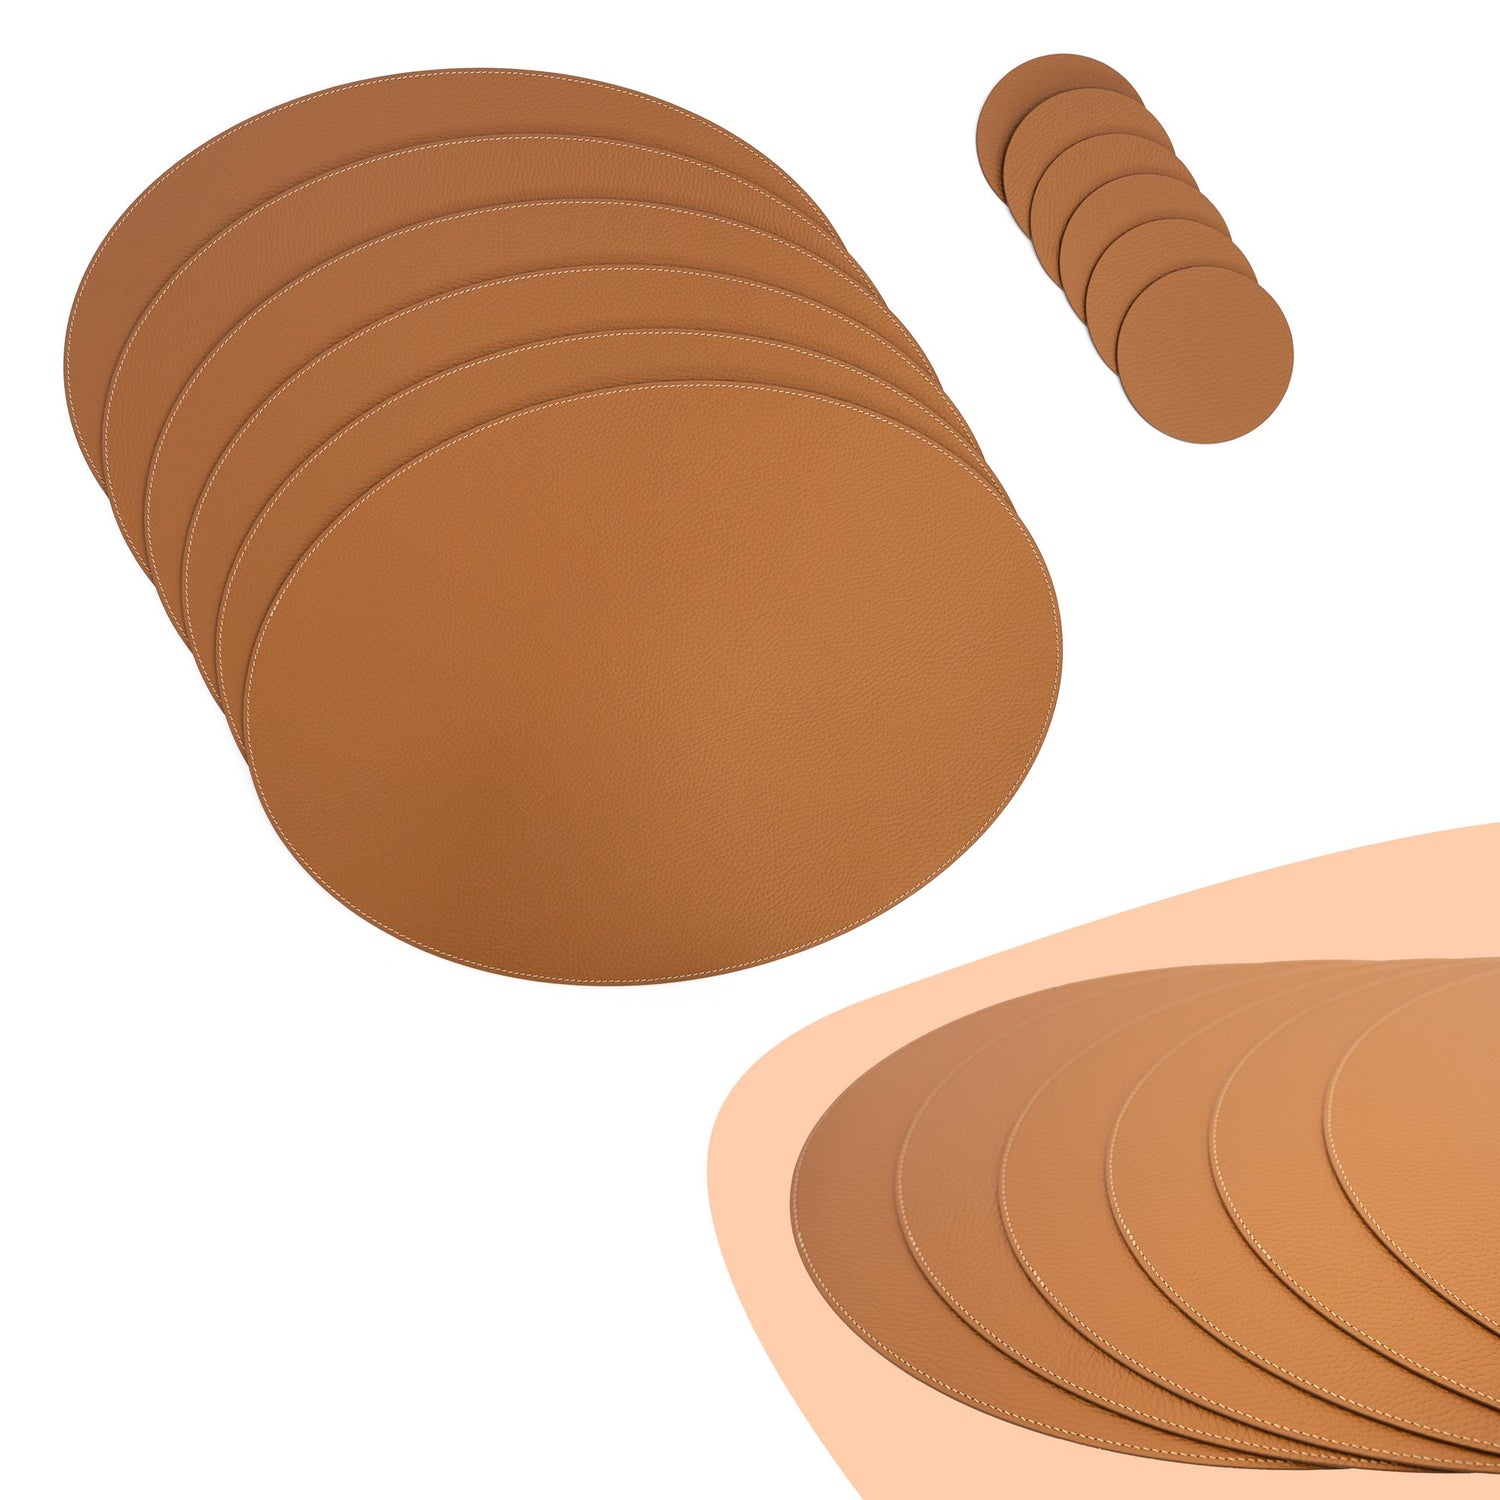 Placemats for Home Cognac Oval 45x33